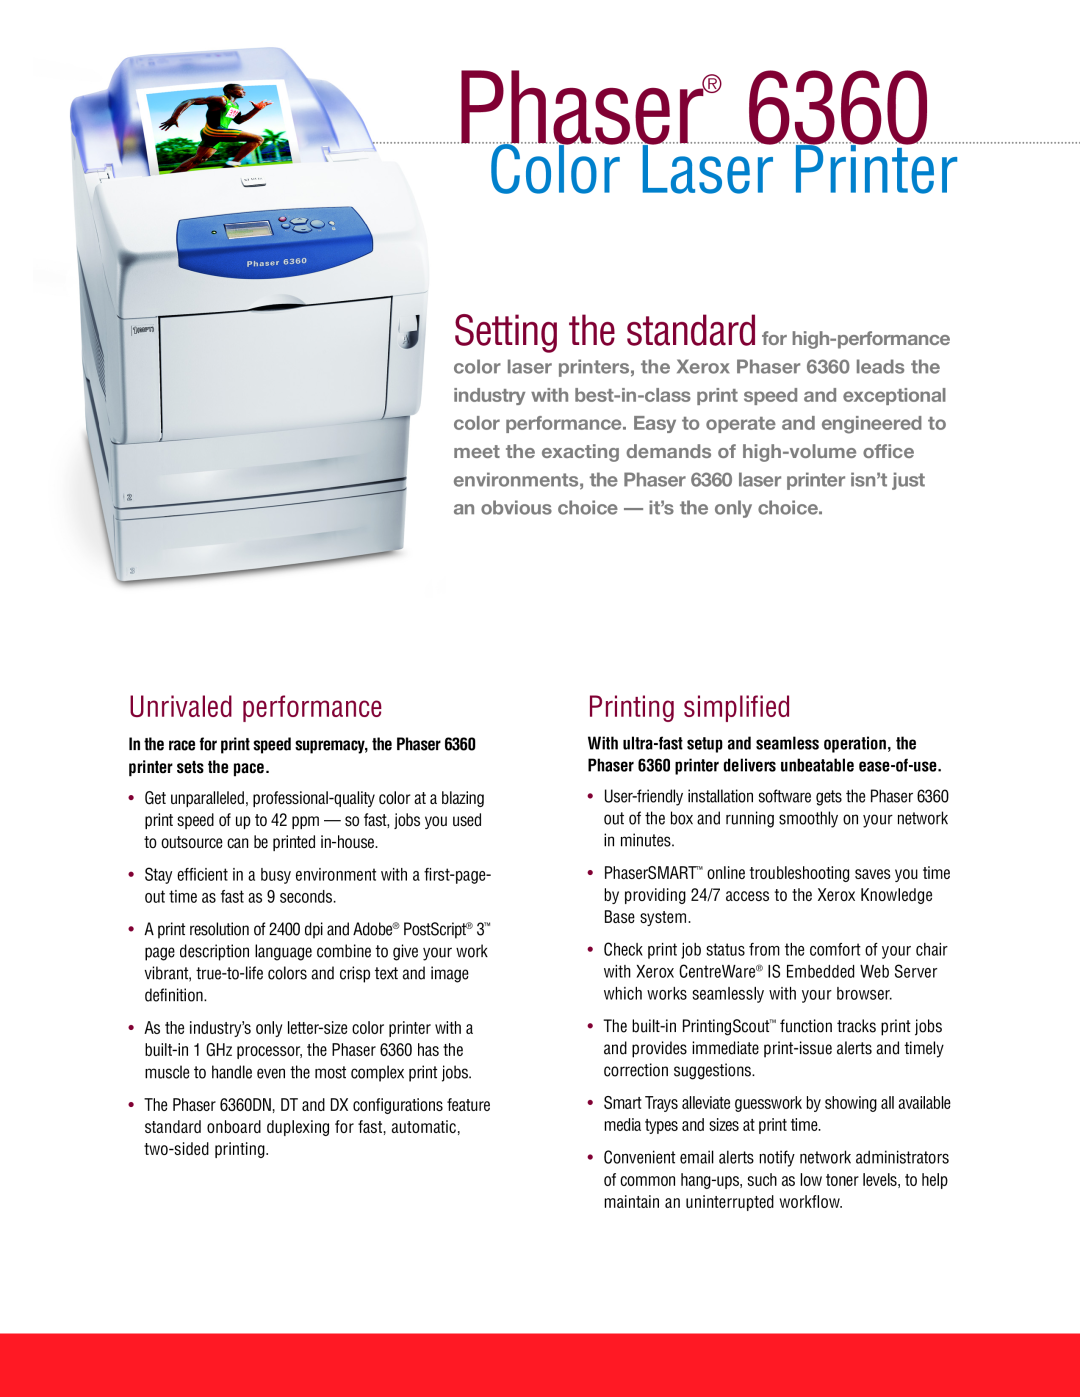 Xerox 6360 manual Unrivaled performance, Printing simplified, Phaser, Color Laser Printer 